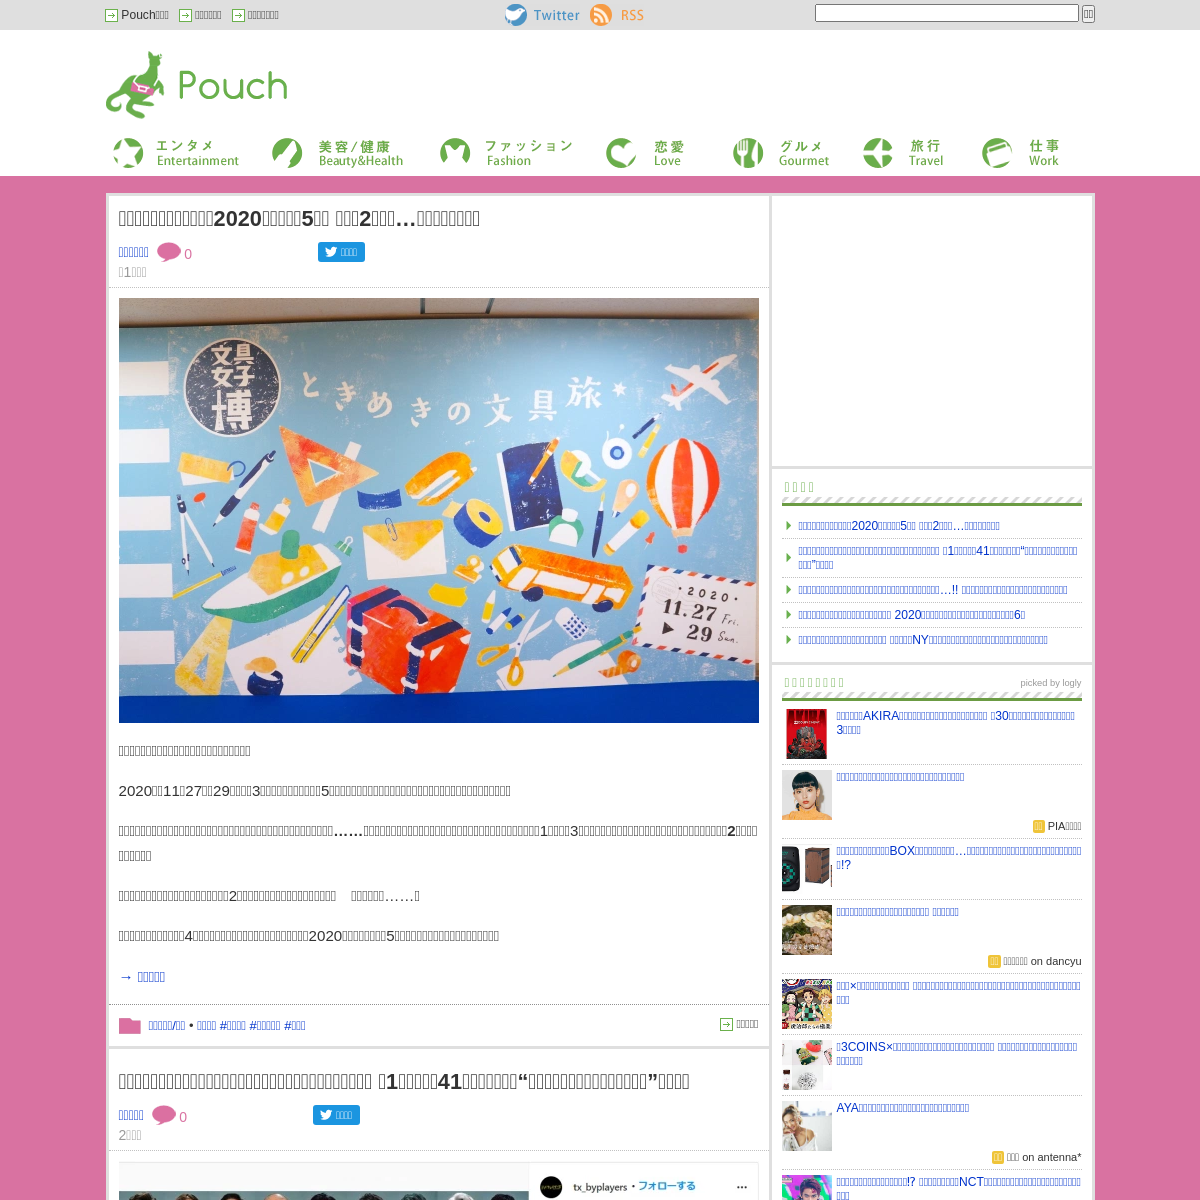 A complete backup of youpouch.com